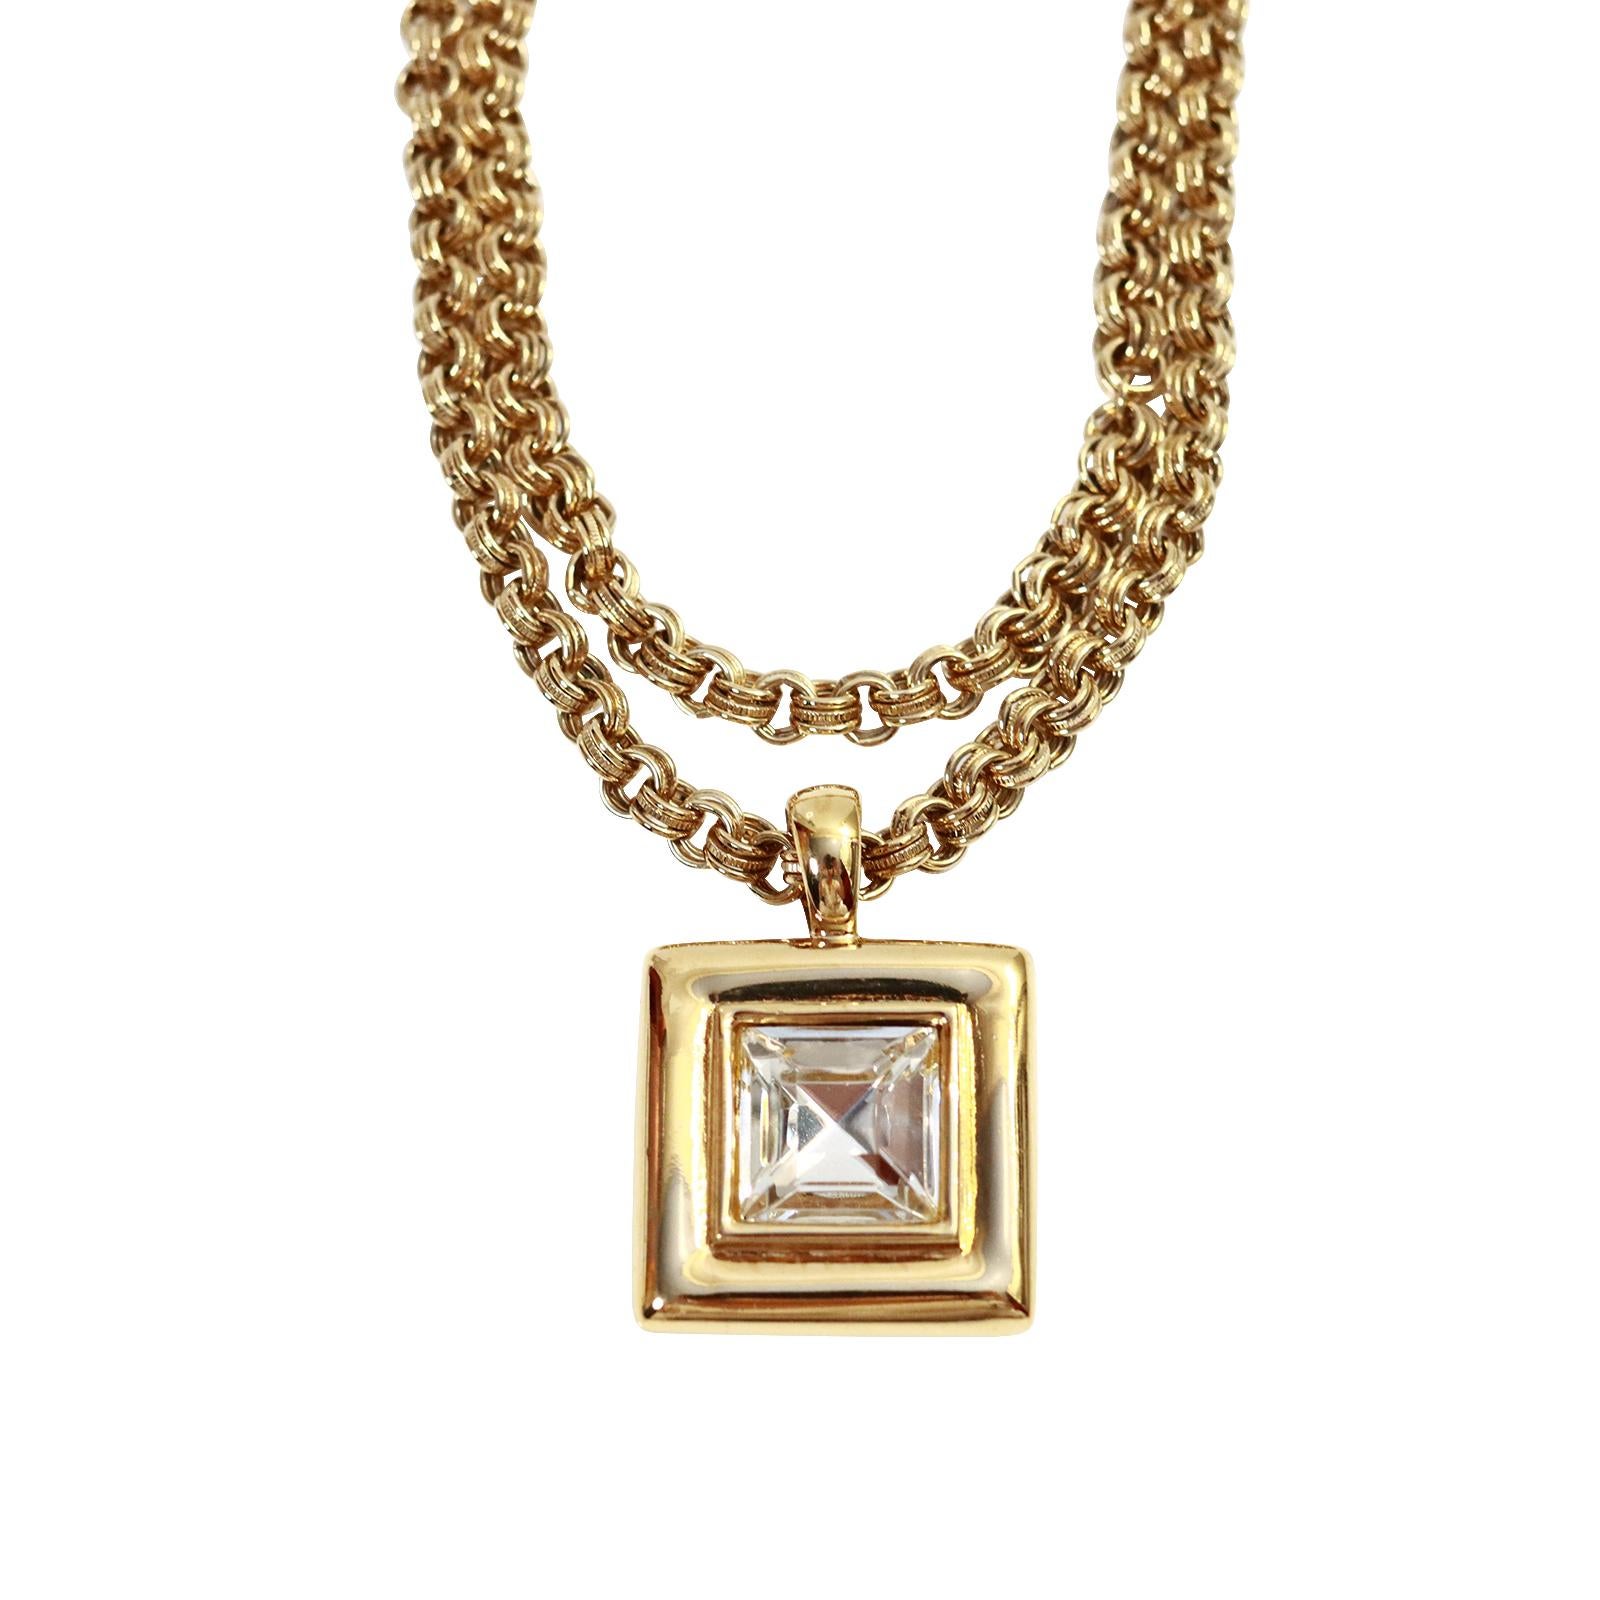 Women's or Men's Vintage Givenchy Link Chain with Dangling Drop Necklace Circa 1980s For Sale